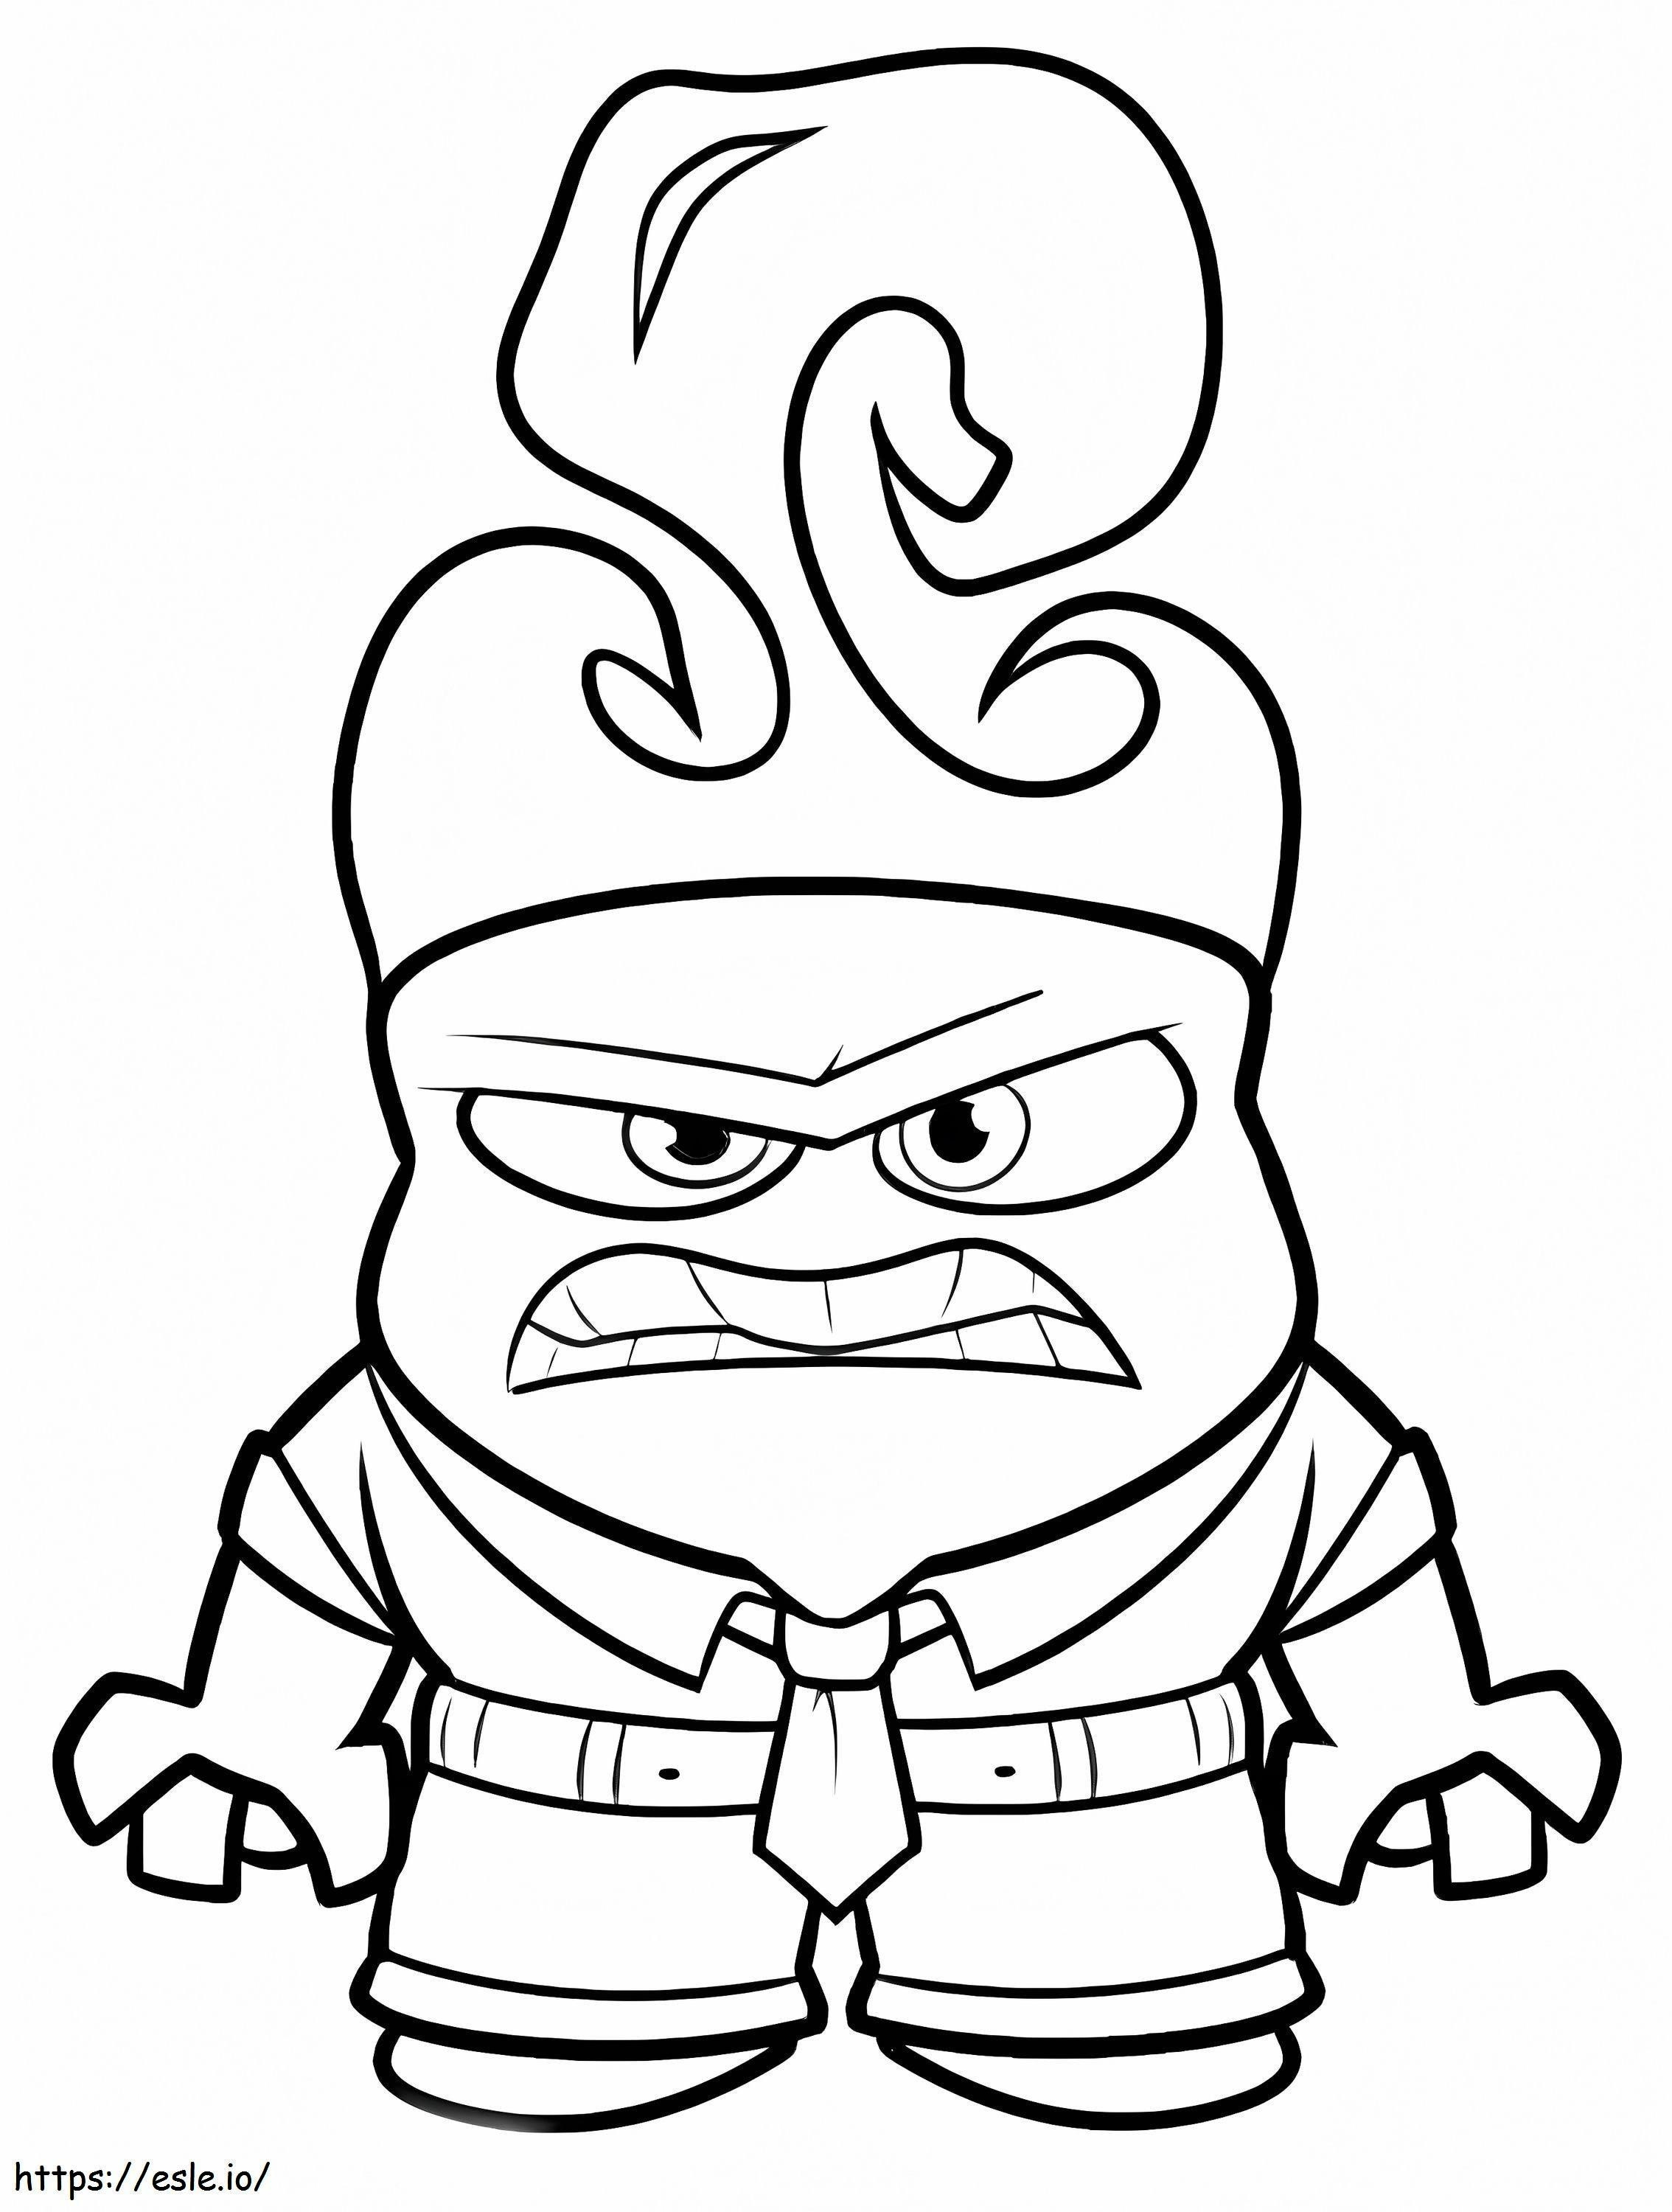 Anger From The Inside Out coloring page